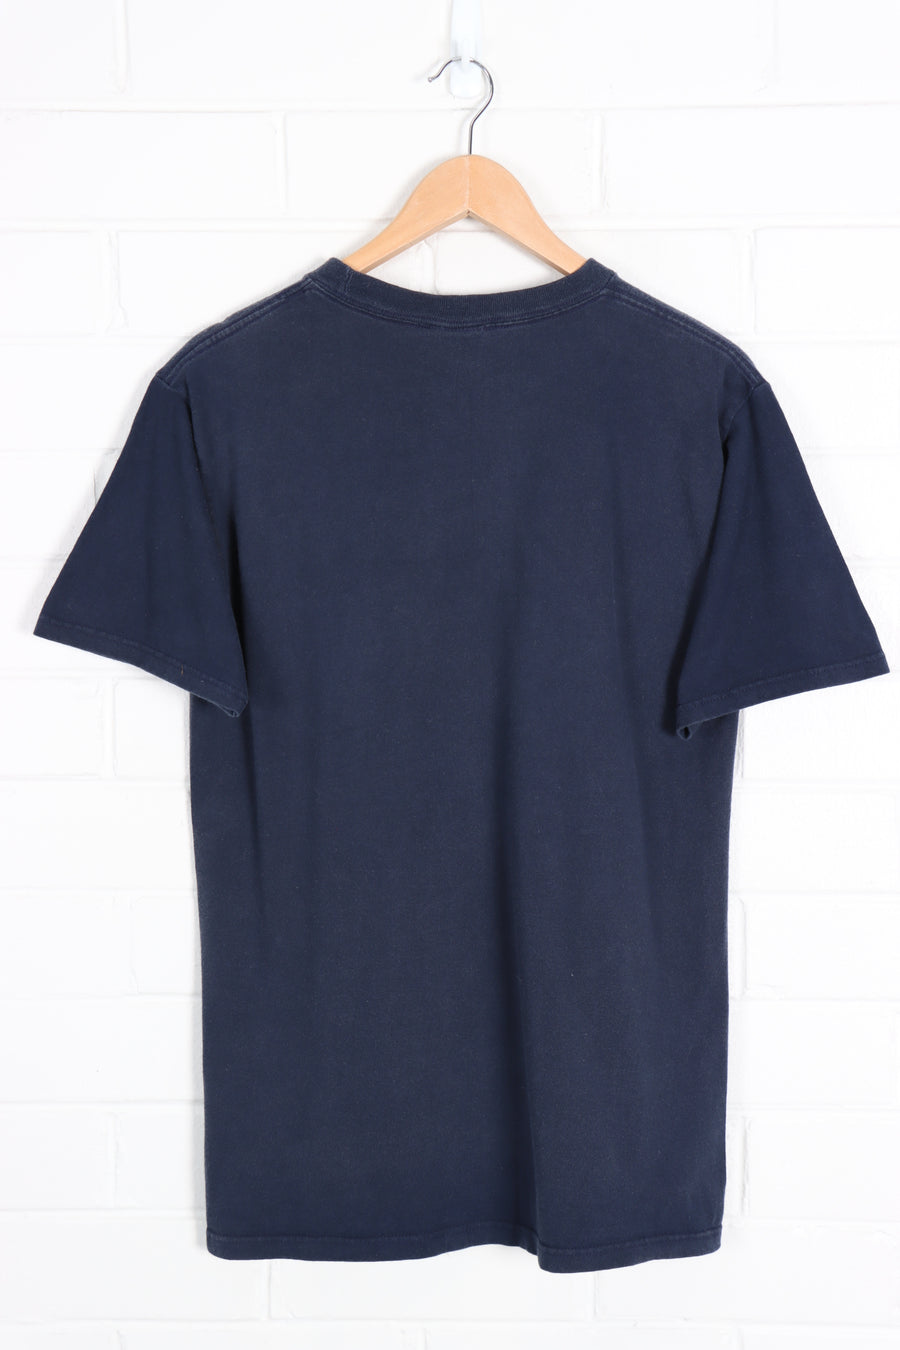 NIKE Centre Swoosh Navy Softball Tee (S) - Vintage Sole Melbourne